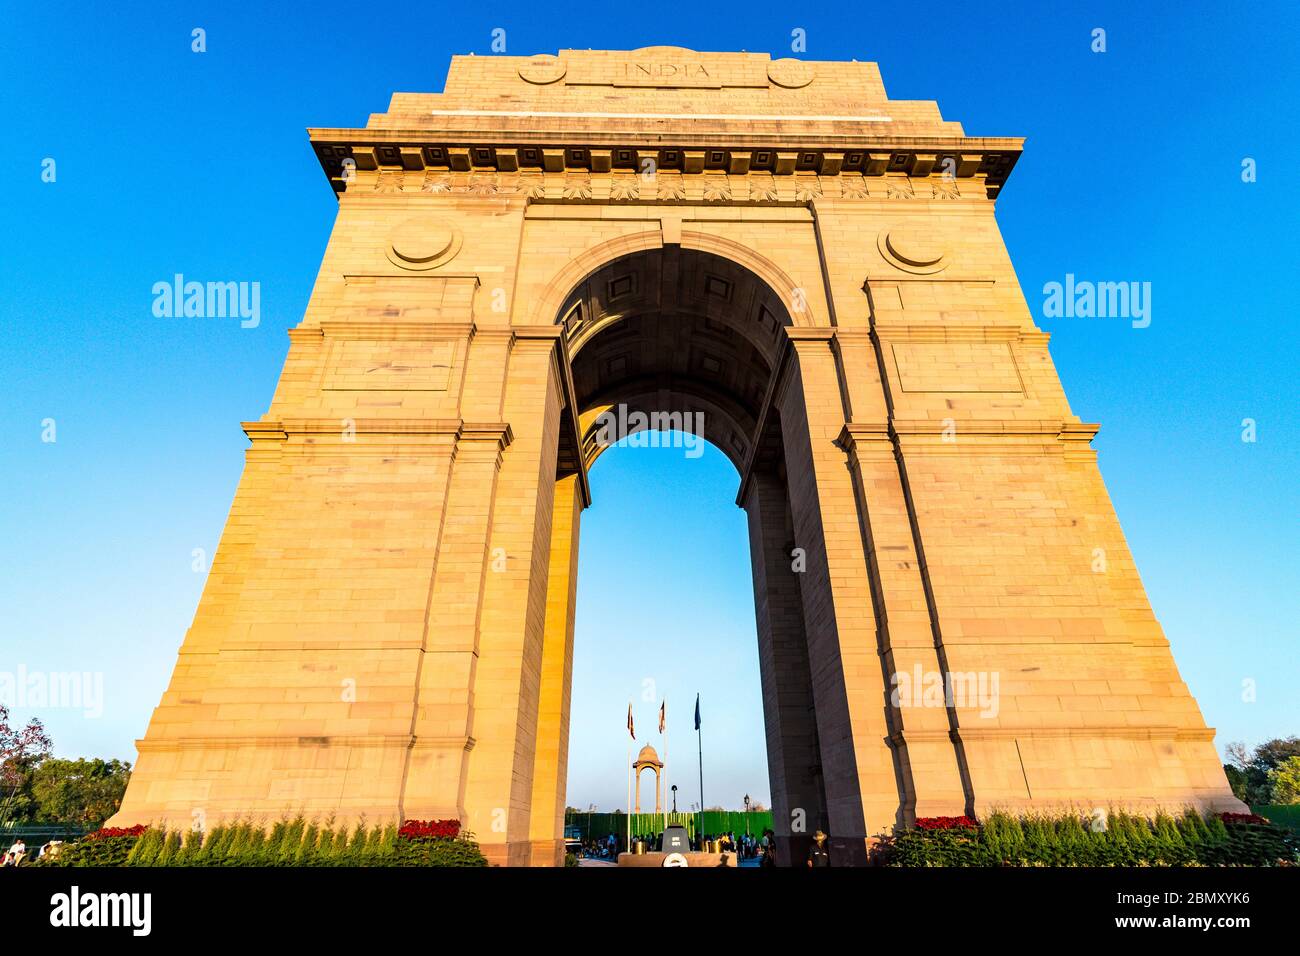 India Gate located in New Delhi, India - This gate is a war memorial located astride the Rajpath. The most famous tourist monument in the capital city. Stock Photo